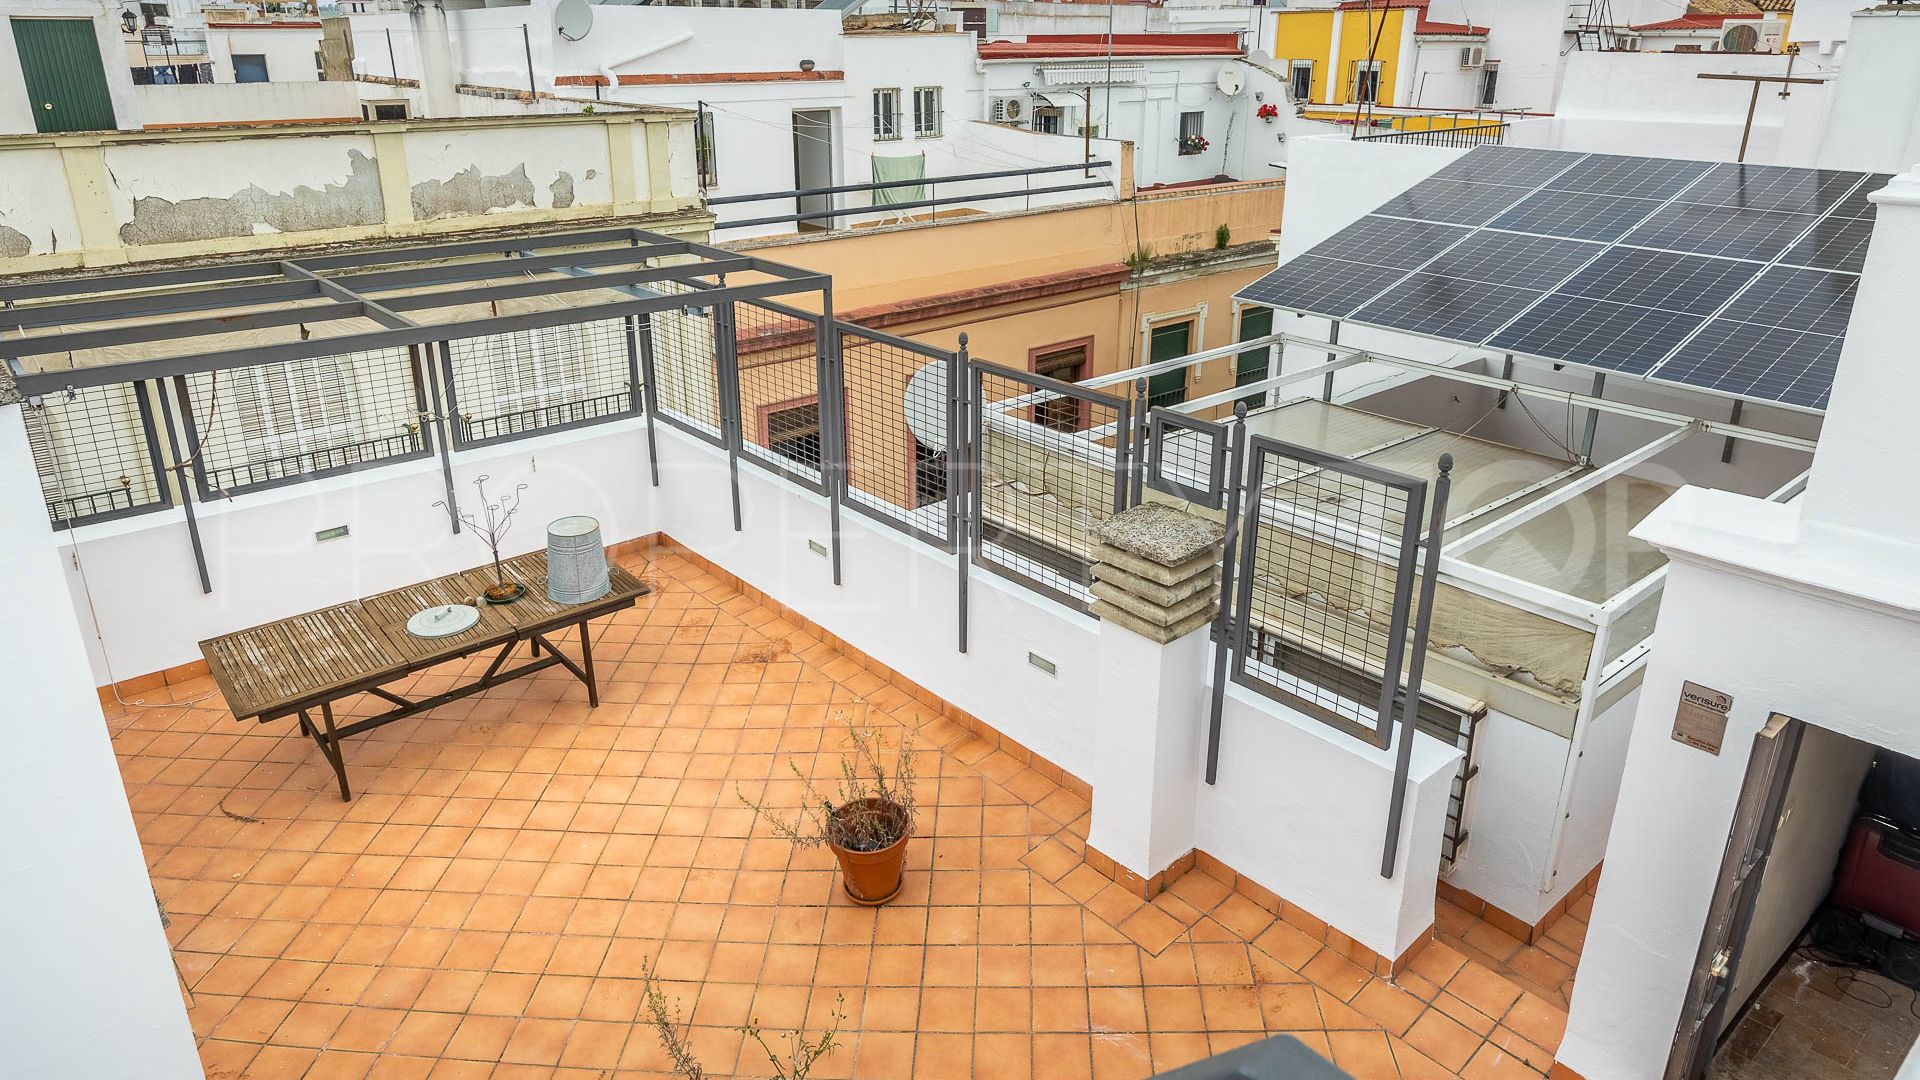 6 bedrooms house in Seville for sale